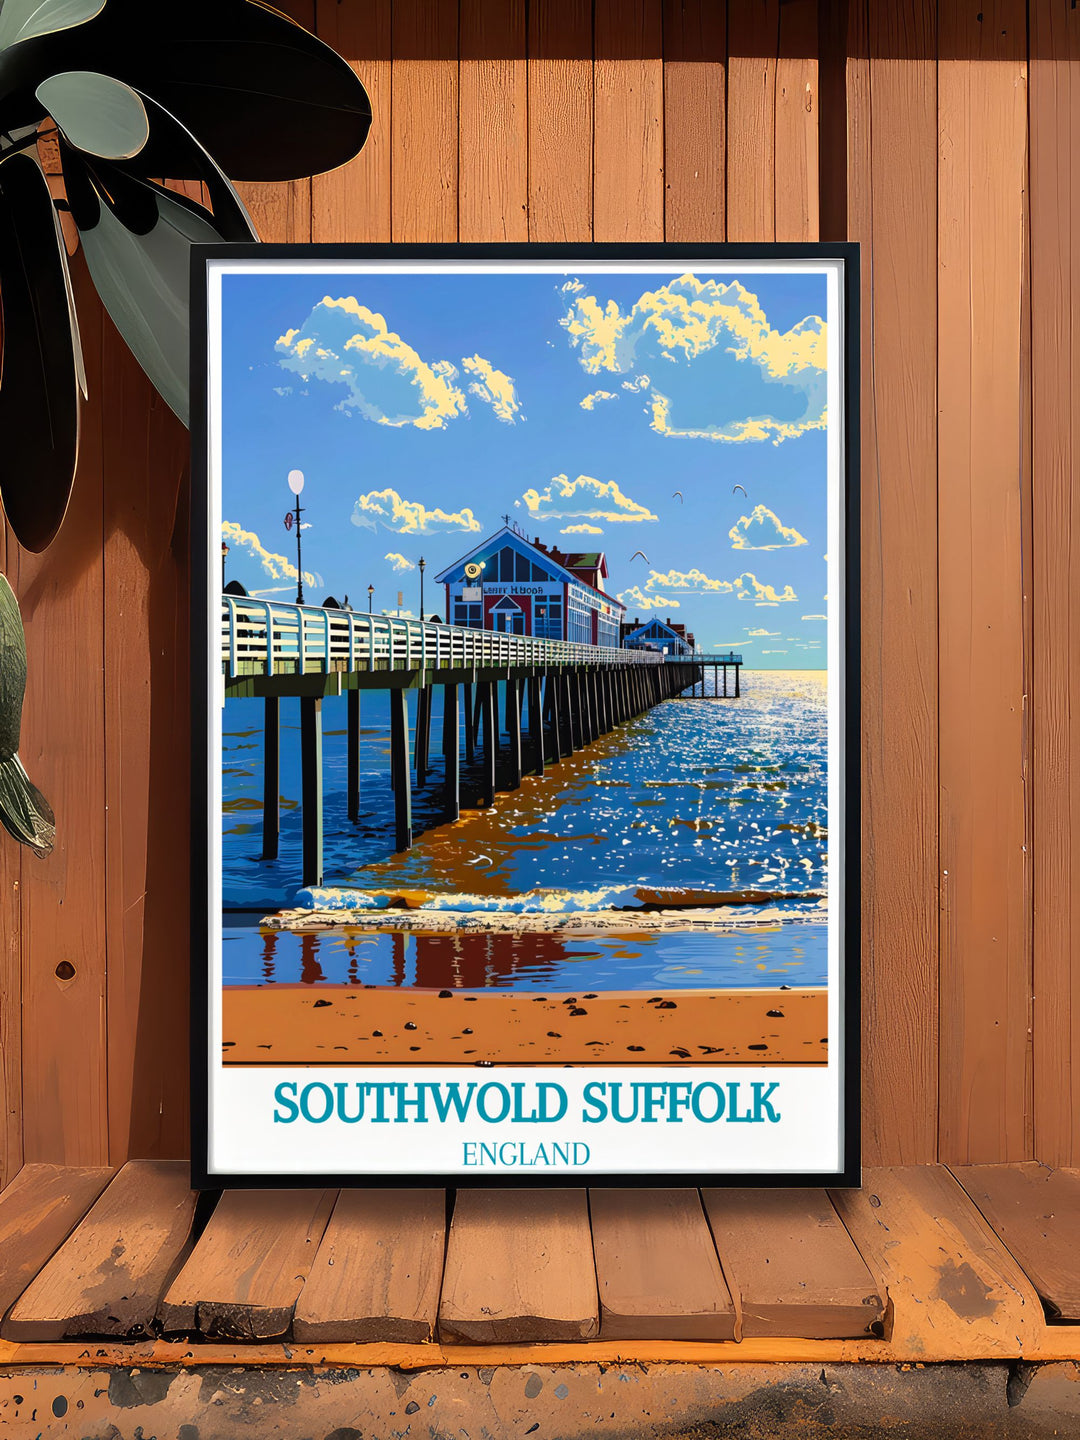 Embrace the coastal beauty and historical heritage of Southwold with this travel poster, depicting the pier and the charming Edwardian architecture.